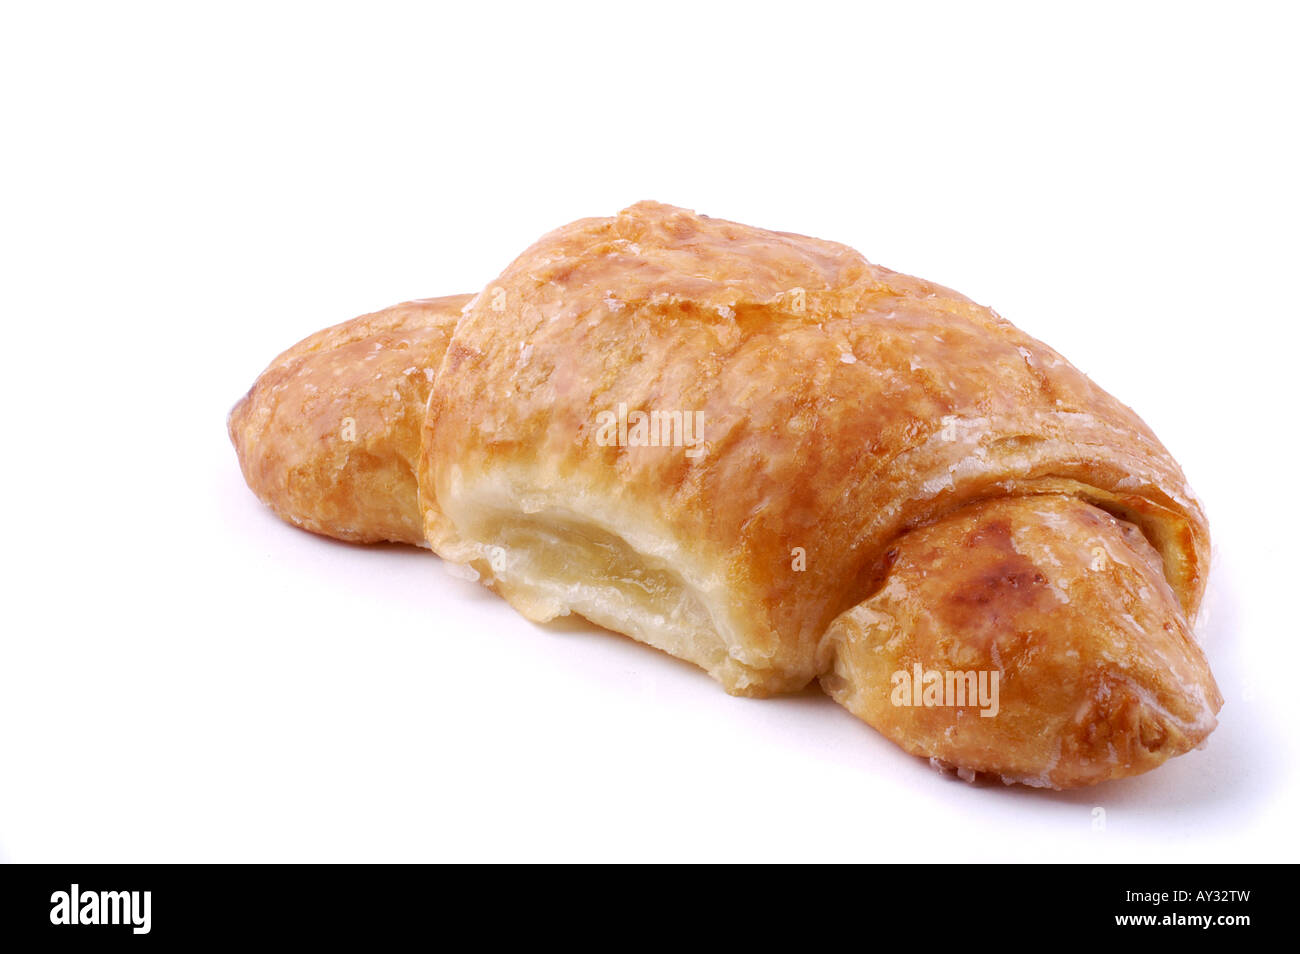 Nusshörnchen / Bavarian croissant stuffed with nuts Stock Photo